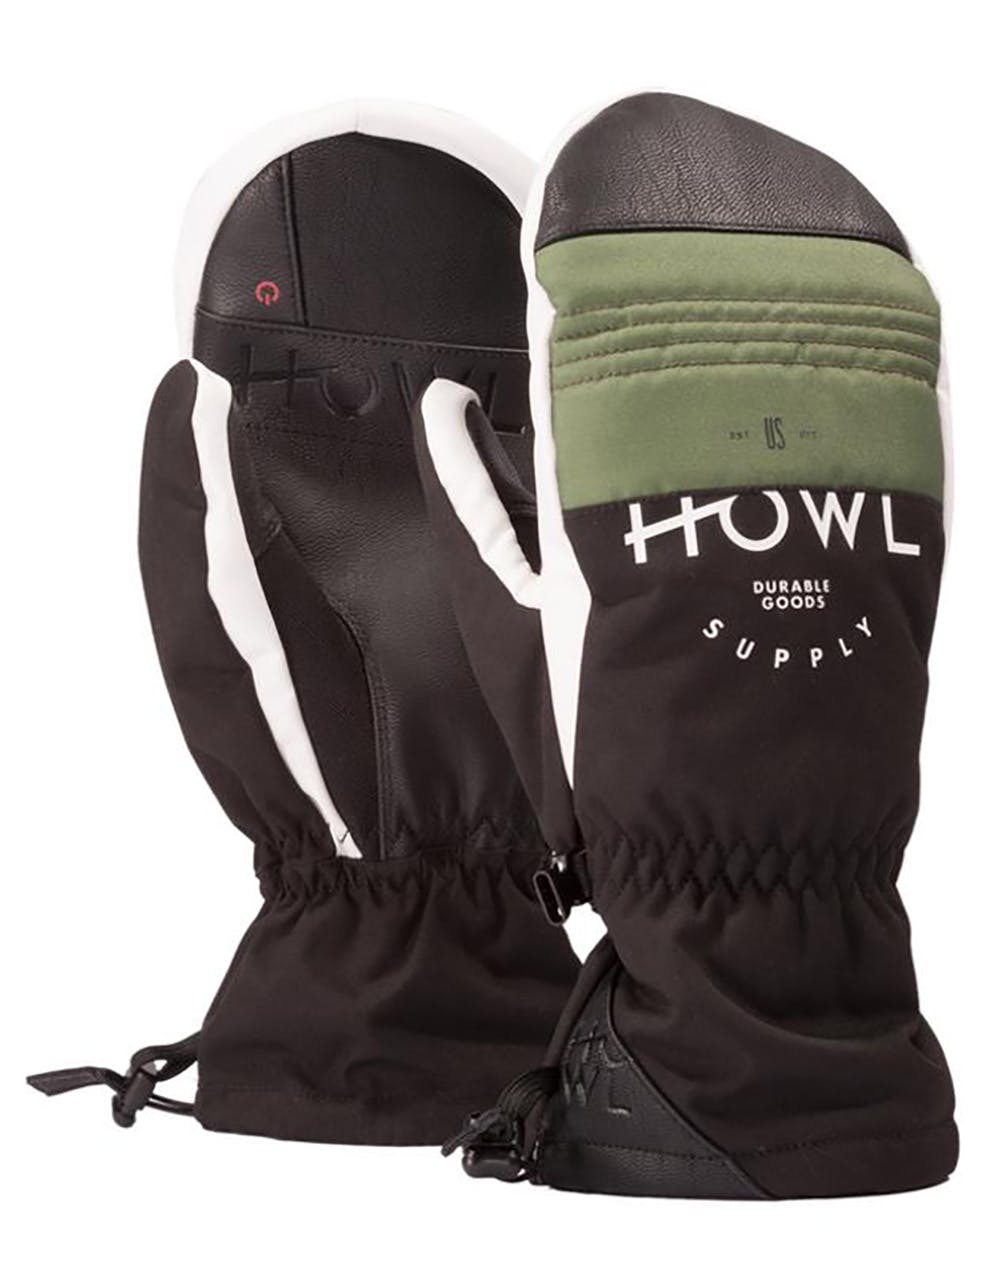 Howl Team Snowboard Mitts - Olive